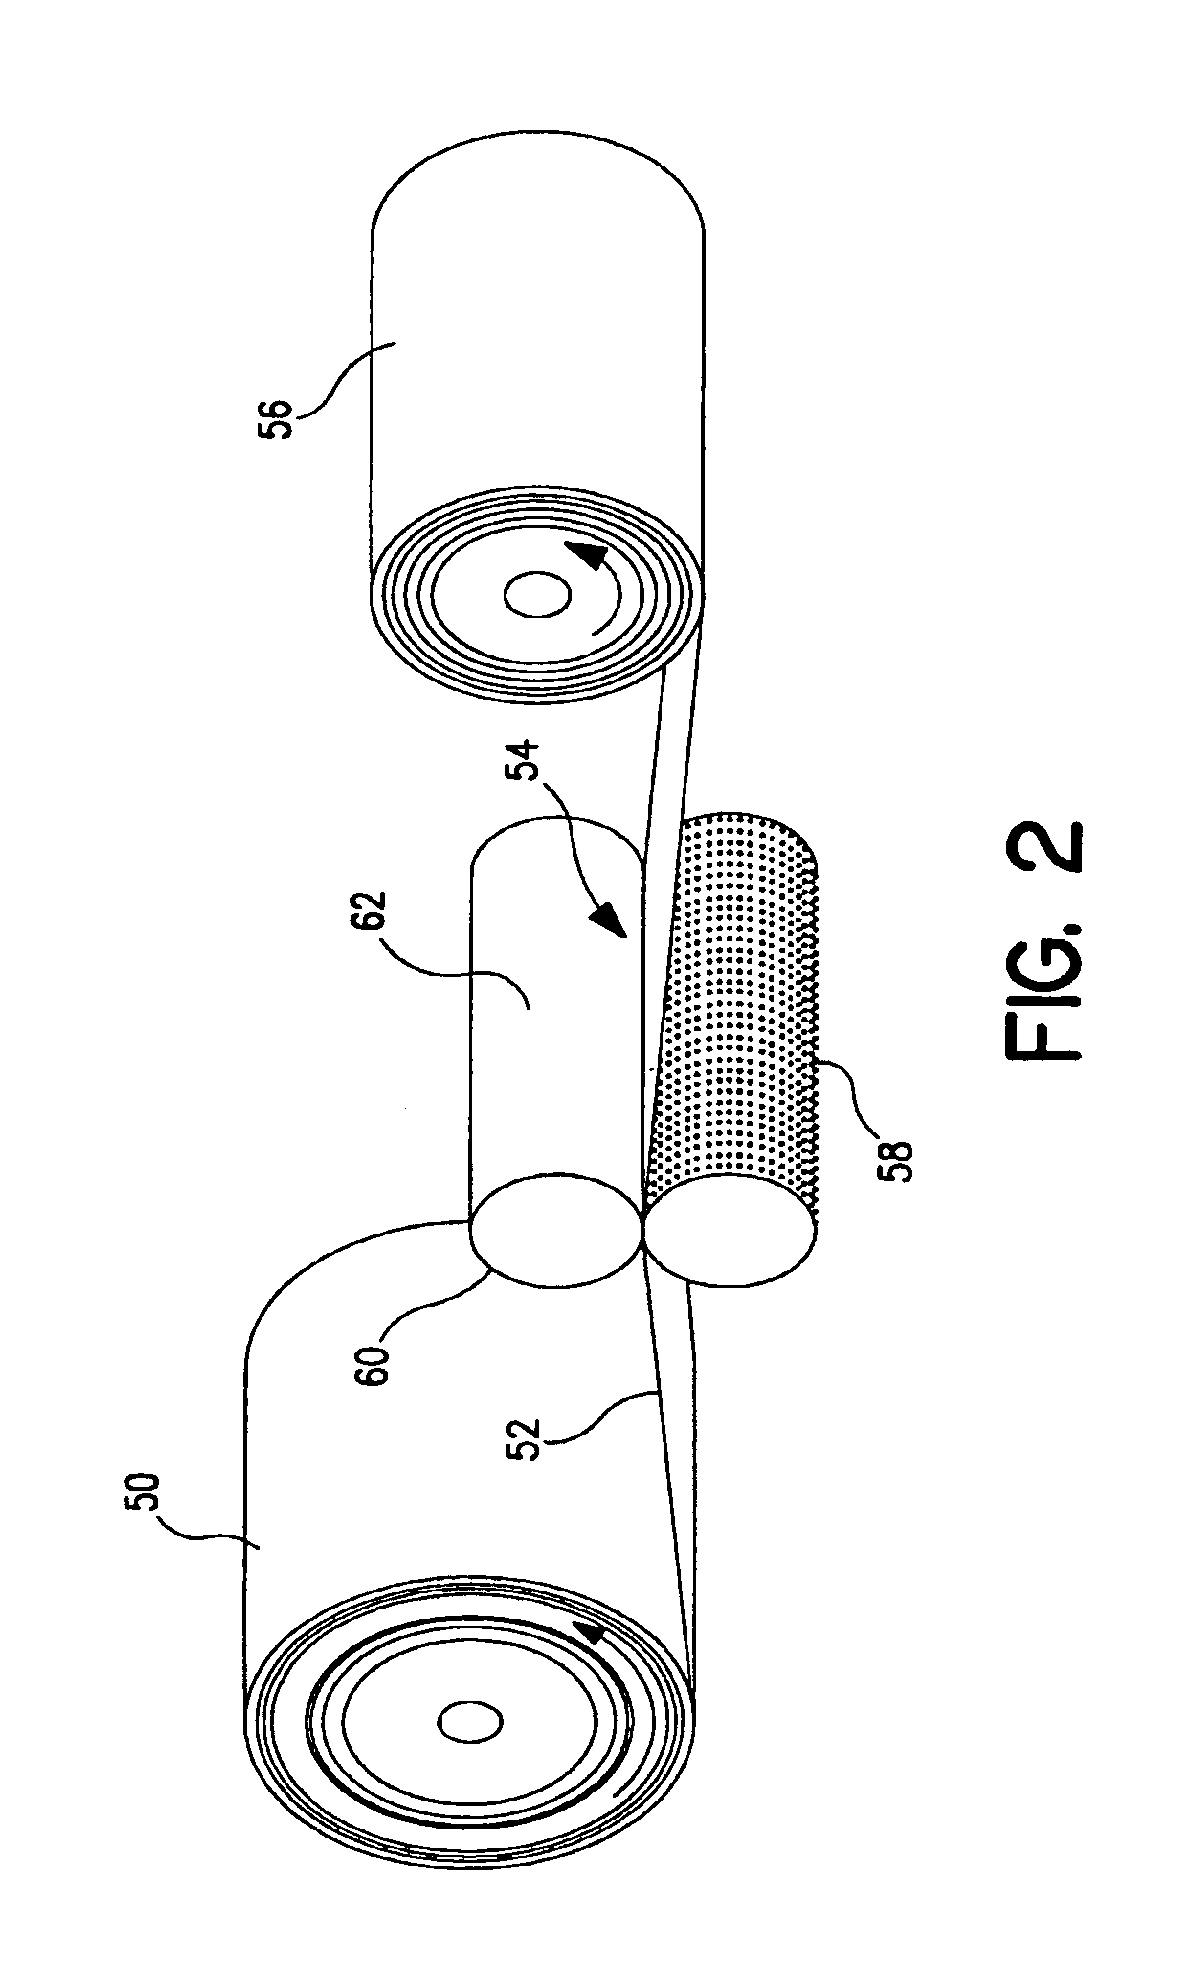 Embossed tissue product with improved bulk properties